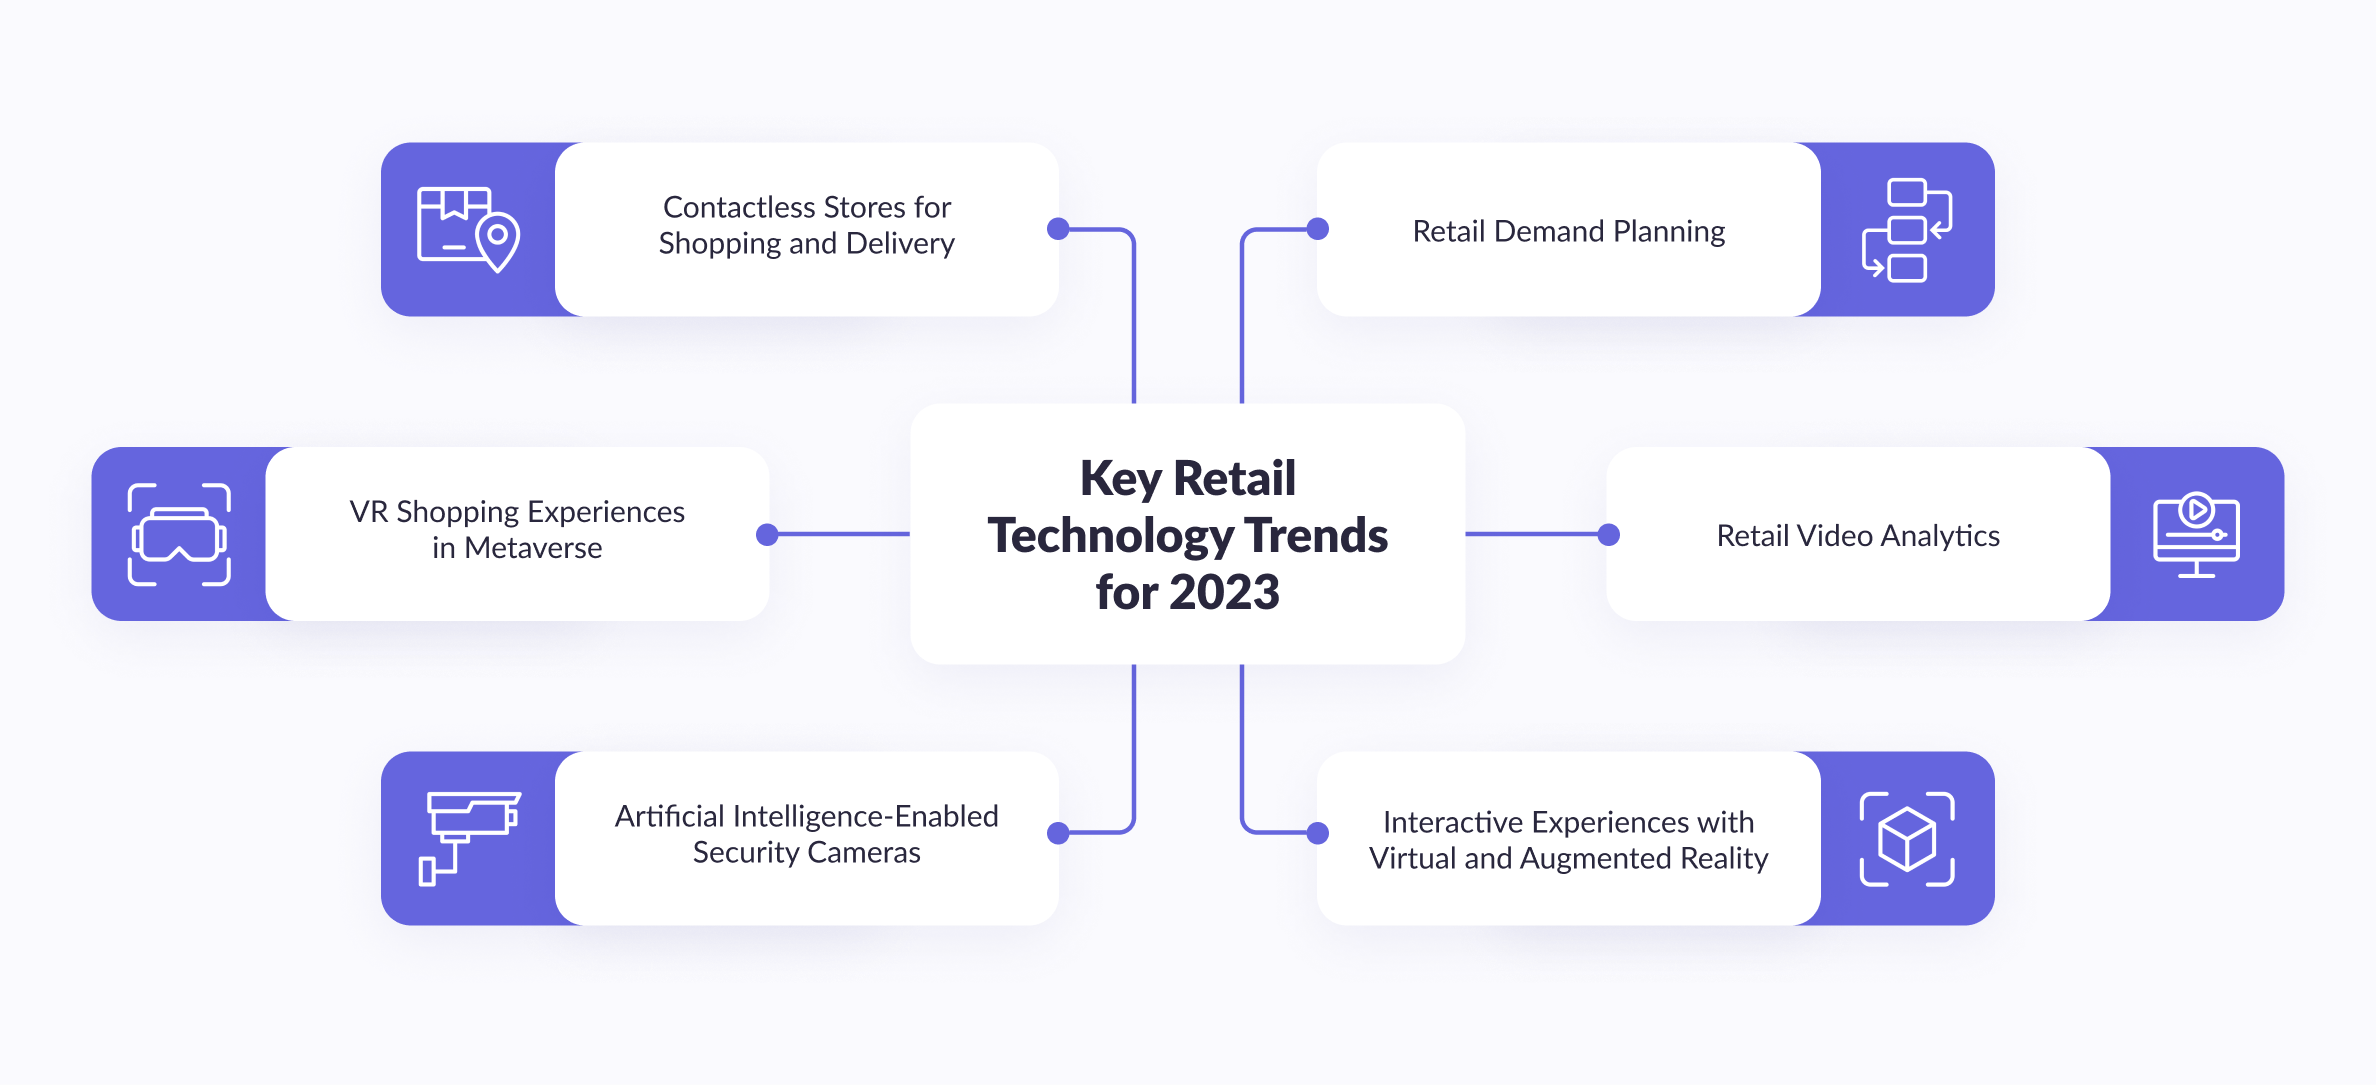 Key retail technology trends for this year